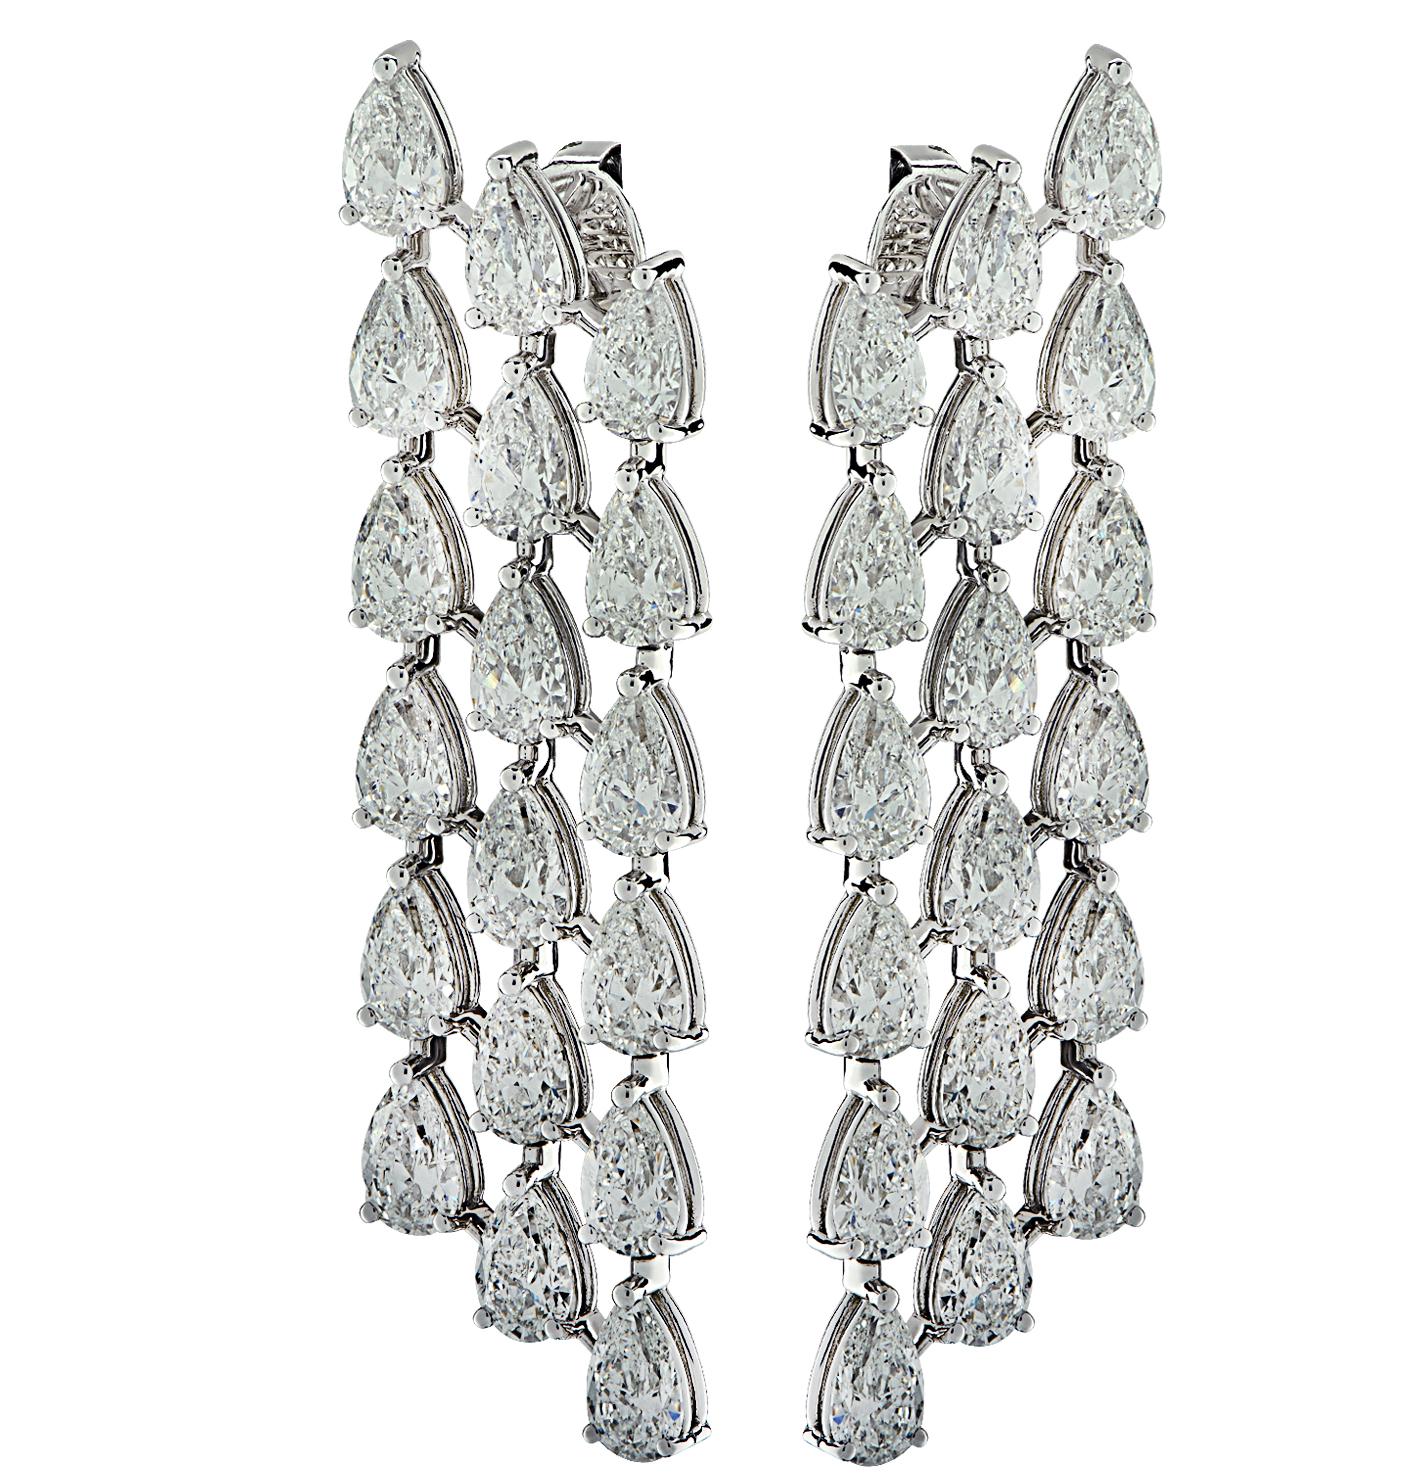 Sensational Vivid Diamonds Dangle Earrings finely crafted by hand in platinum, featuring 36 GIA Certified Pear shape diamonds weighing 14.68 carats total, D-F color, SI1 clarity. Each spectacular diamond was carefully selected, perfectly matched and